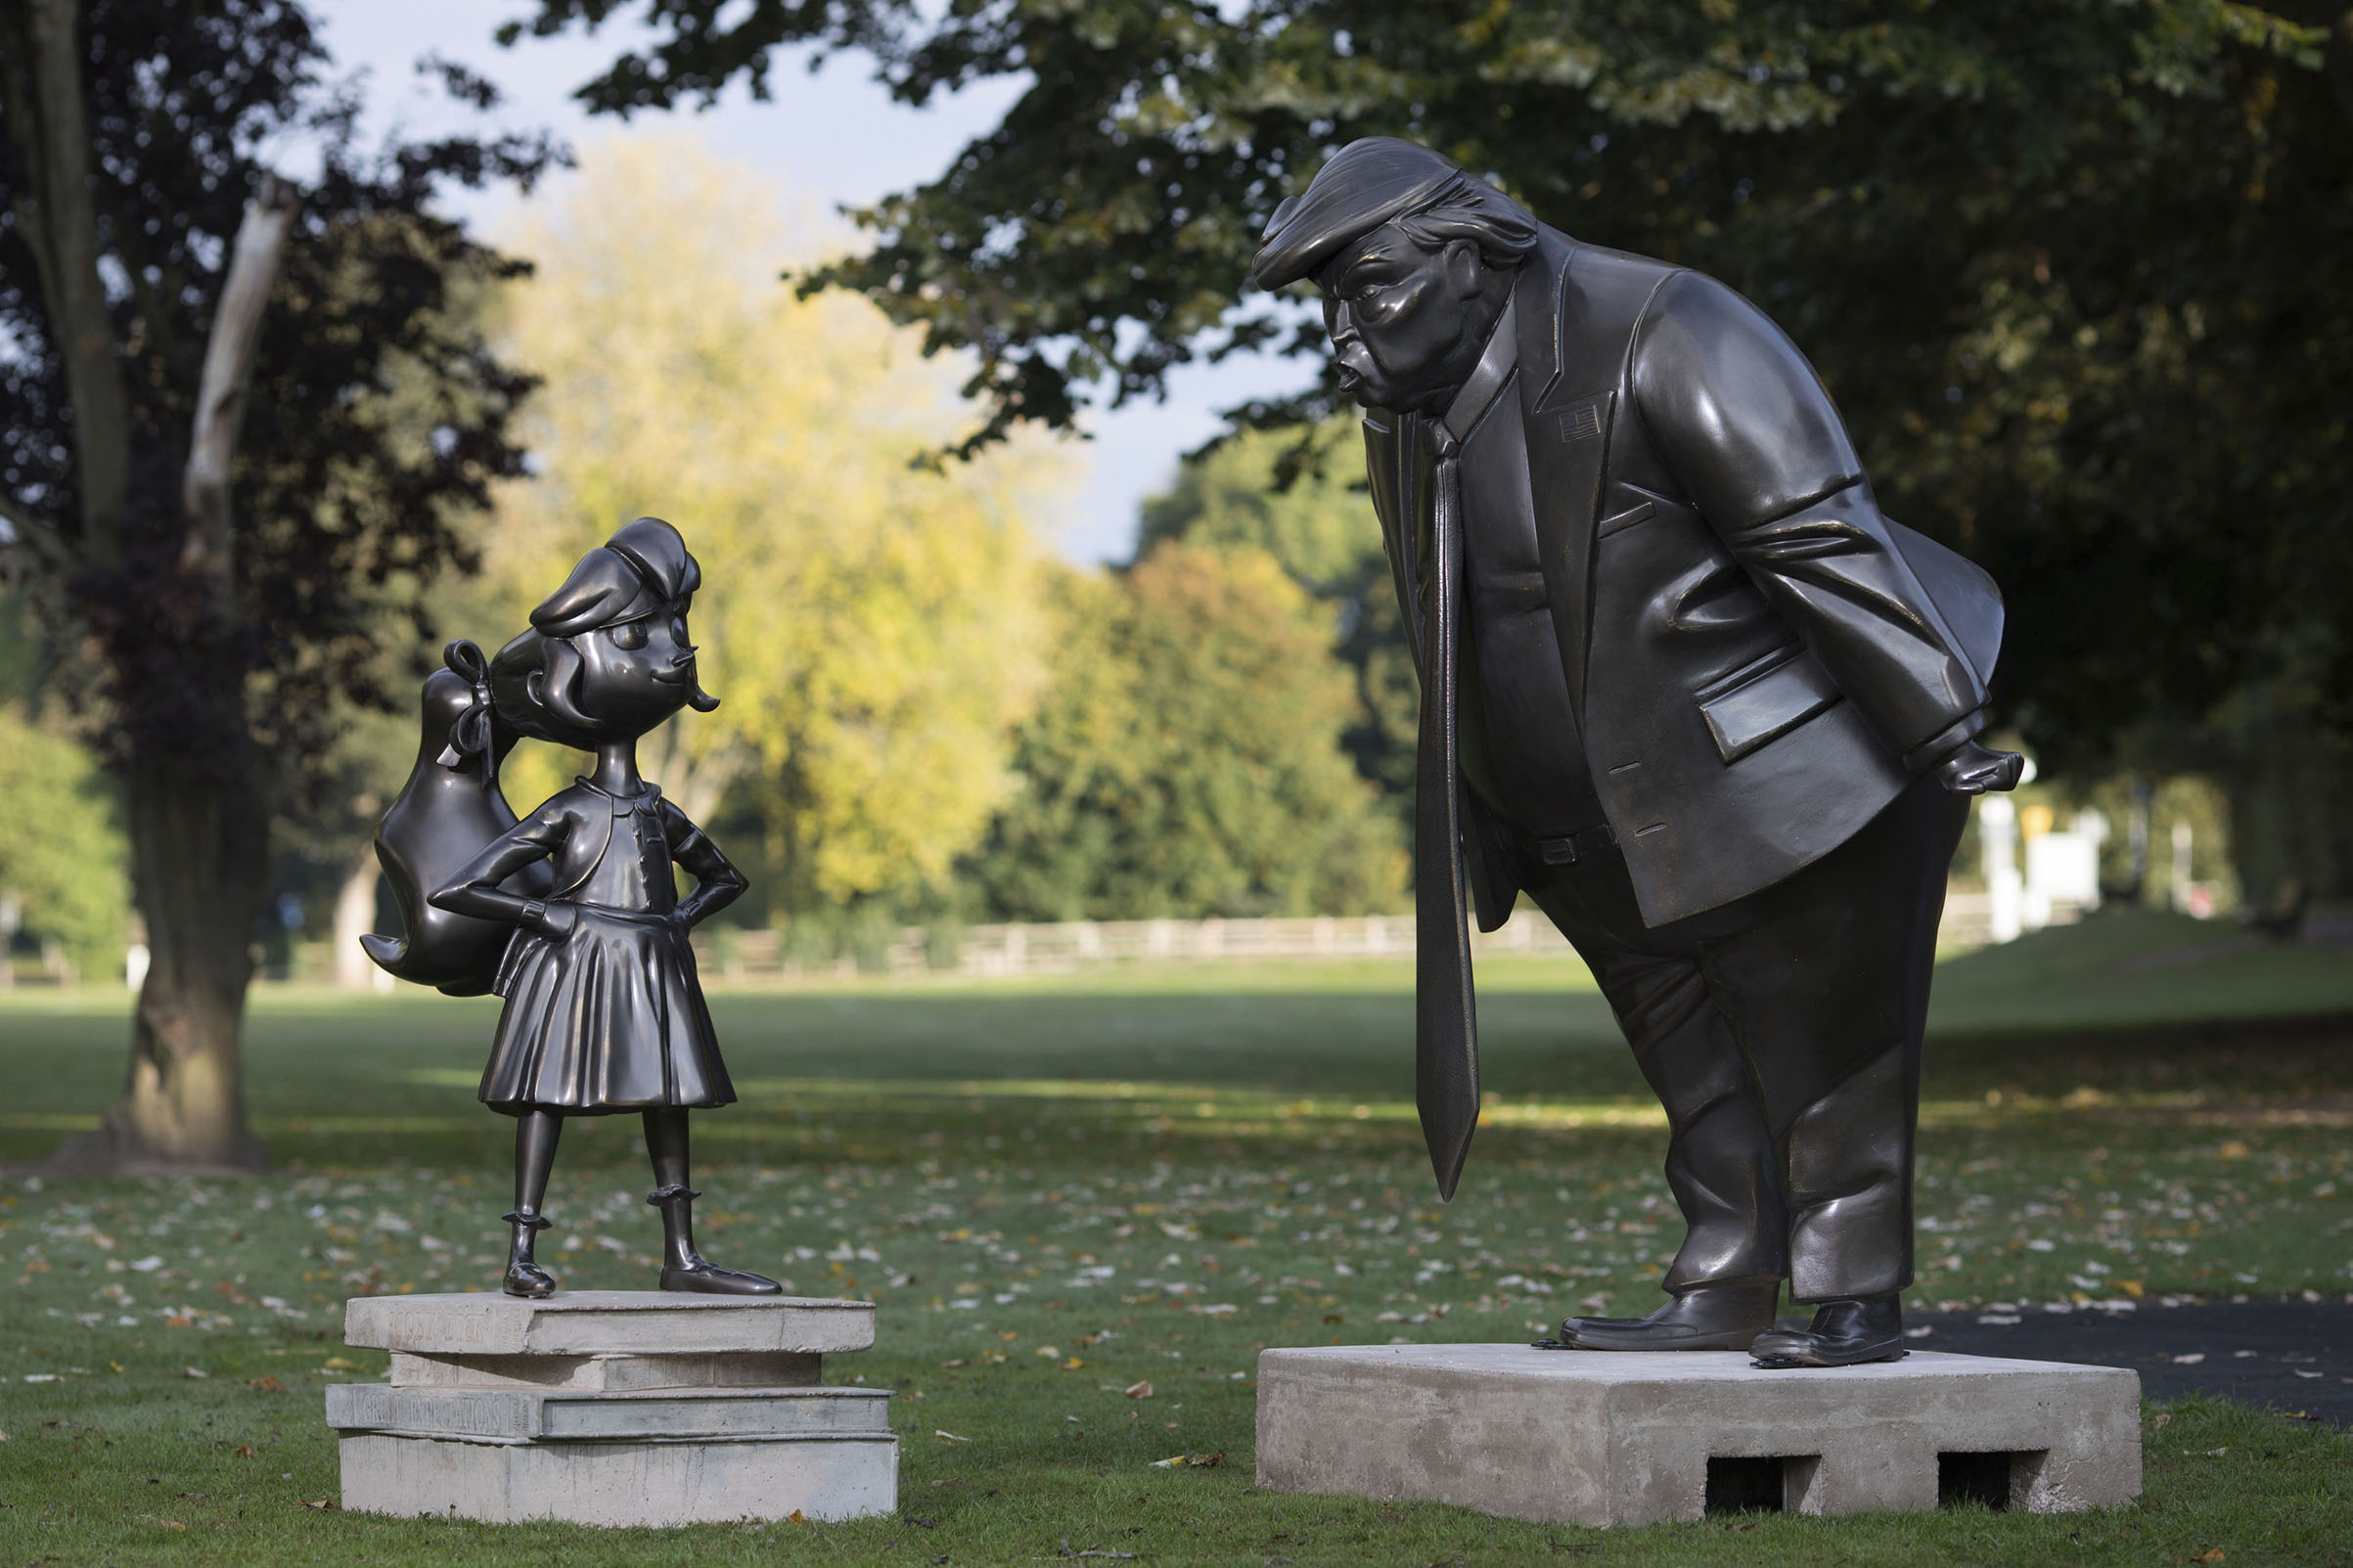 A statue of Roald Dahl's Matilda is unveiled in Great Missenden in Buckinghamshire, alongside one of President Donald Trump, to celebrate the 30th Anniversary of Matilda the novel. (David Parry—PA Wire/AP)